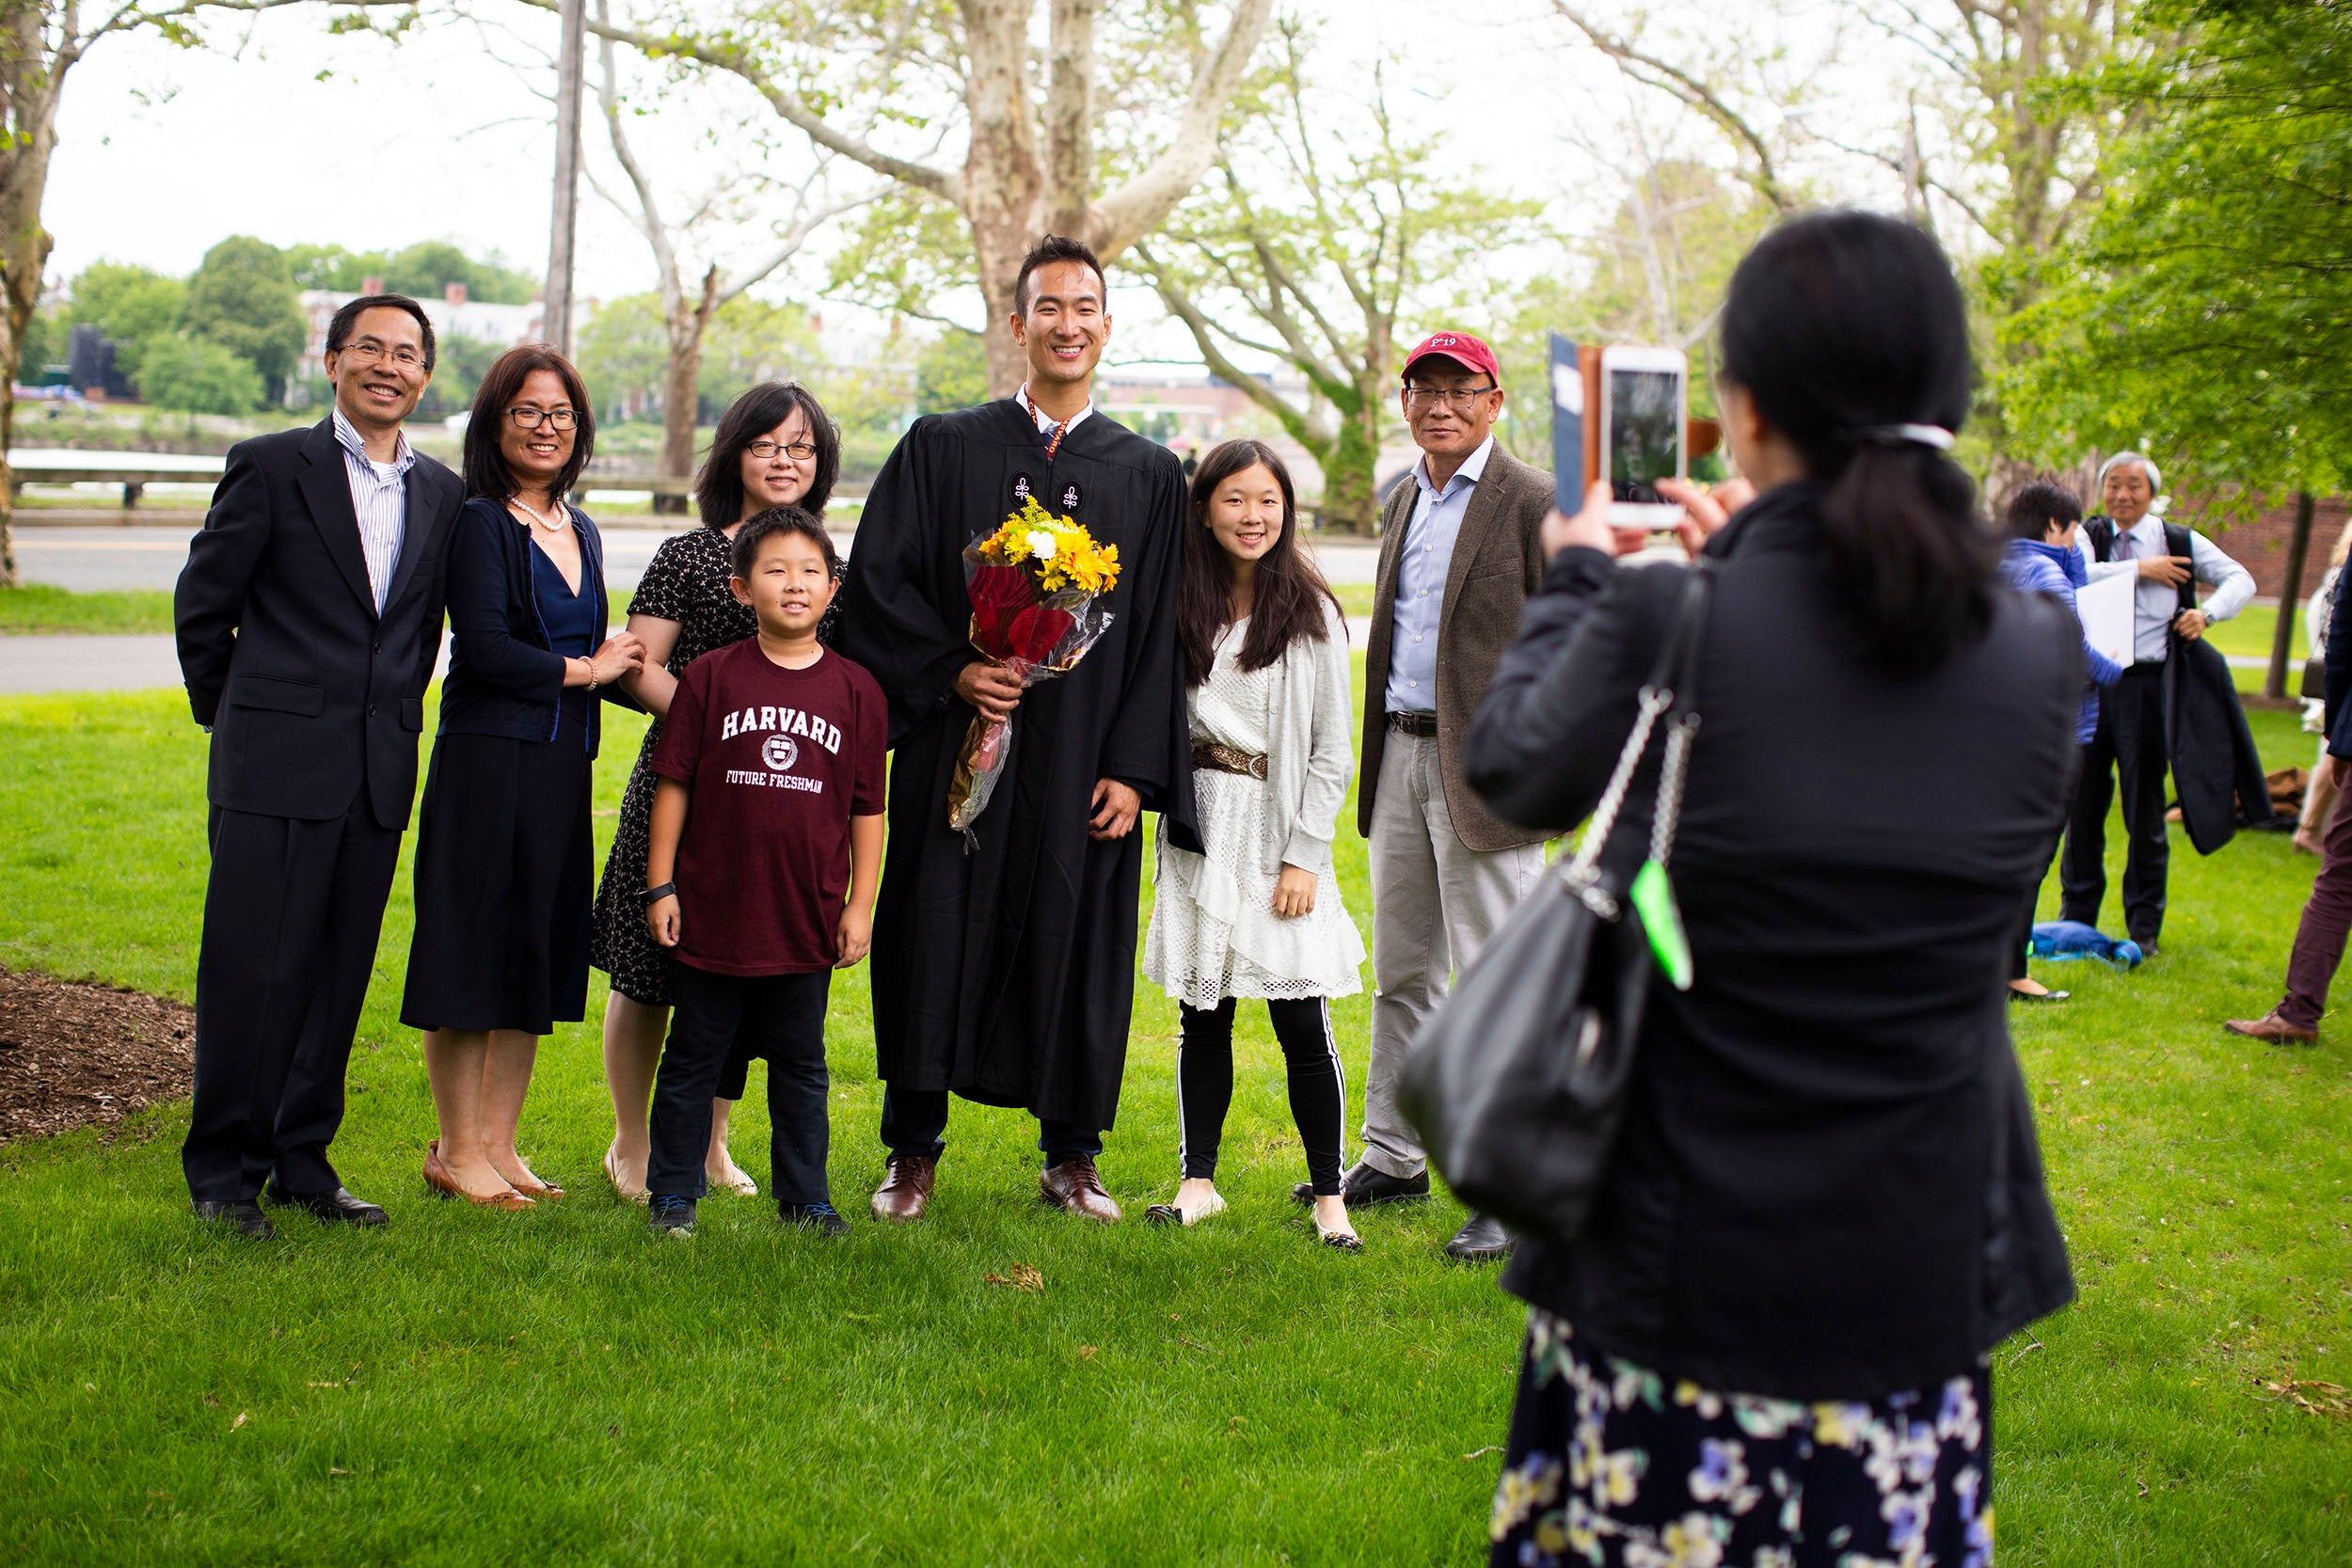 Graduate Michael Liu poses with his family for a photograph.